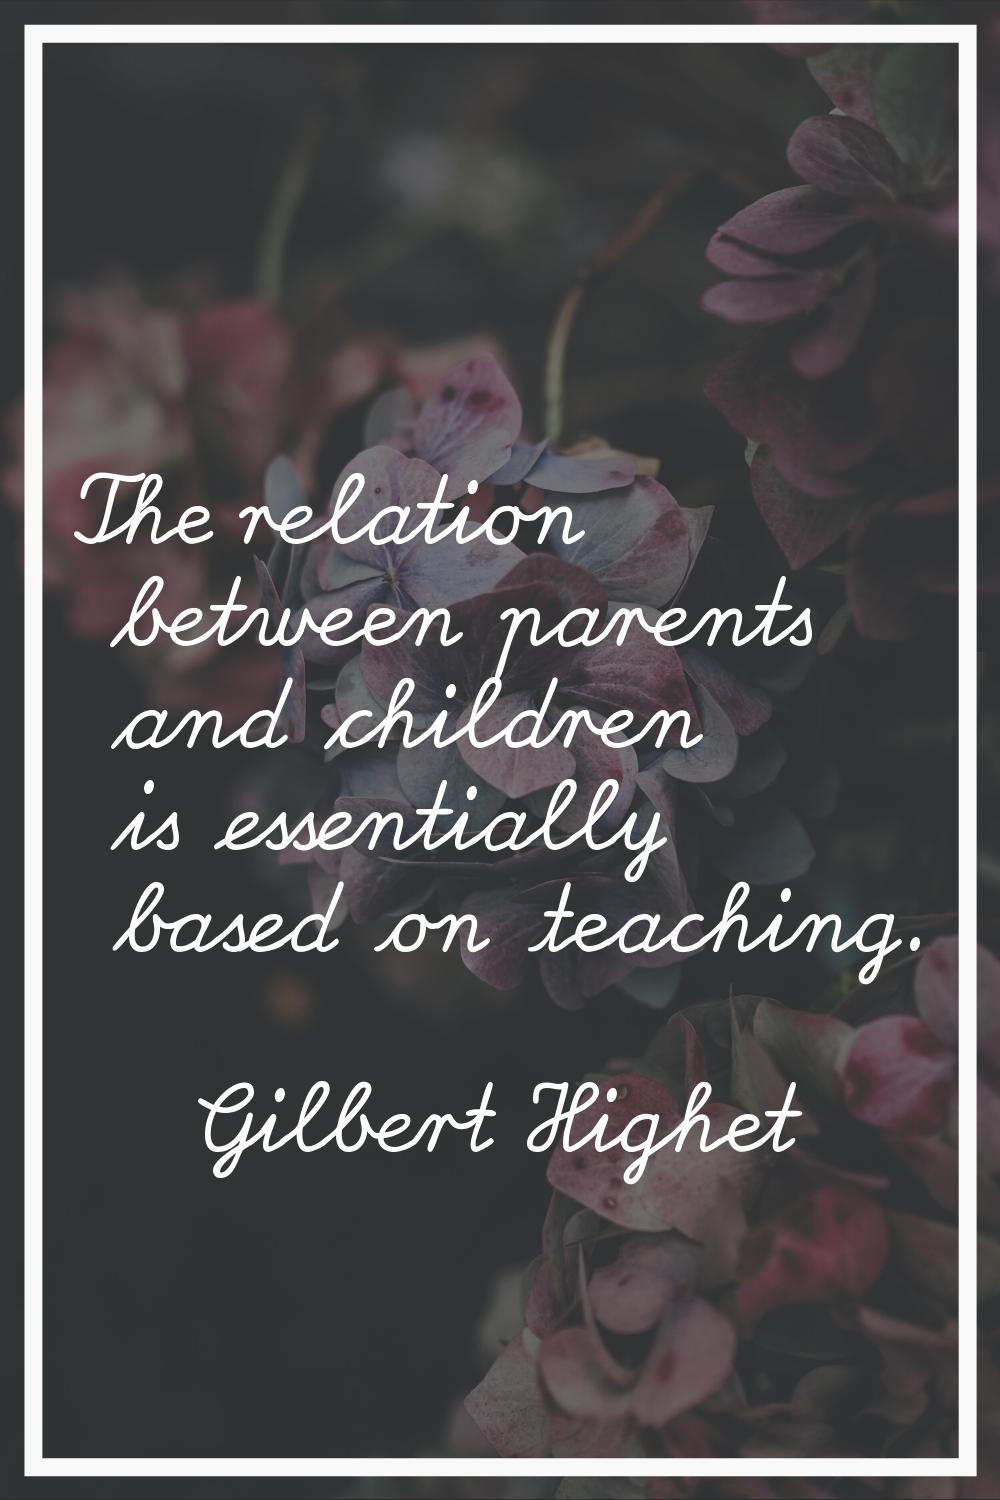 The relation between parents and children is essentially based on teaching.